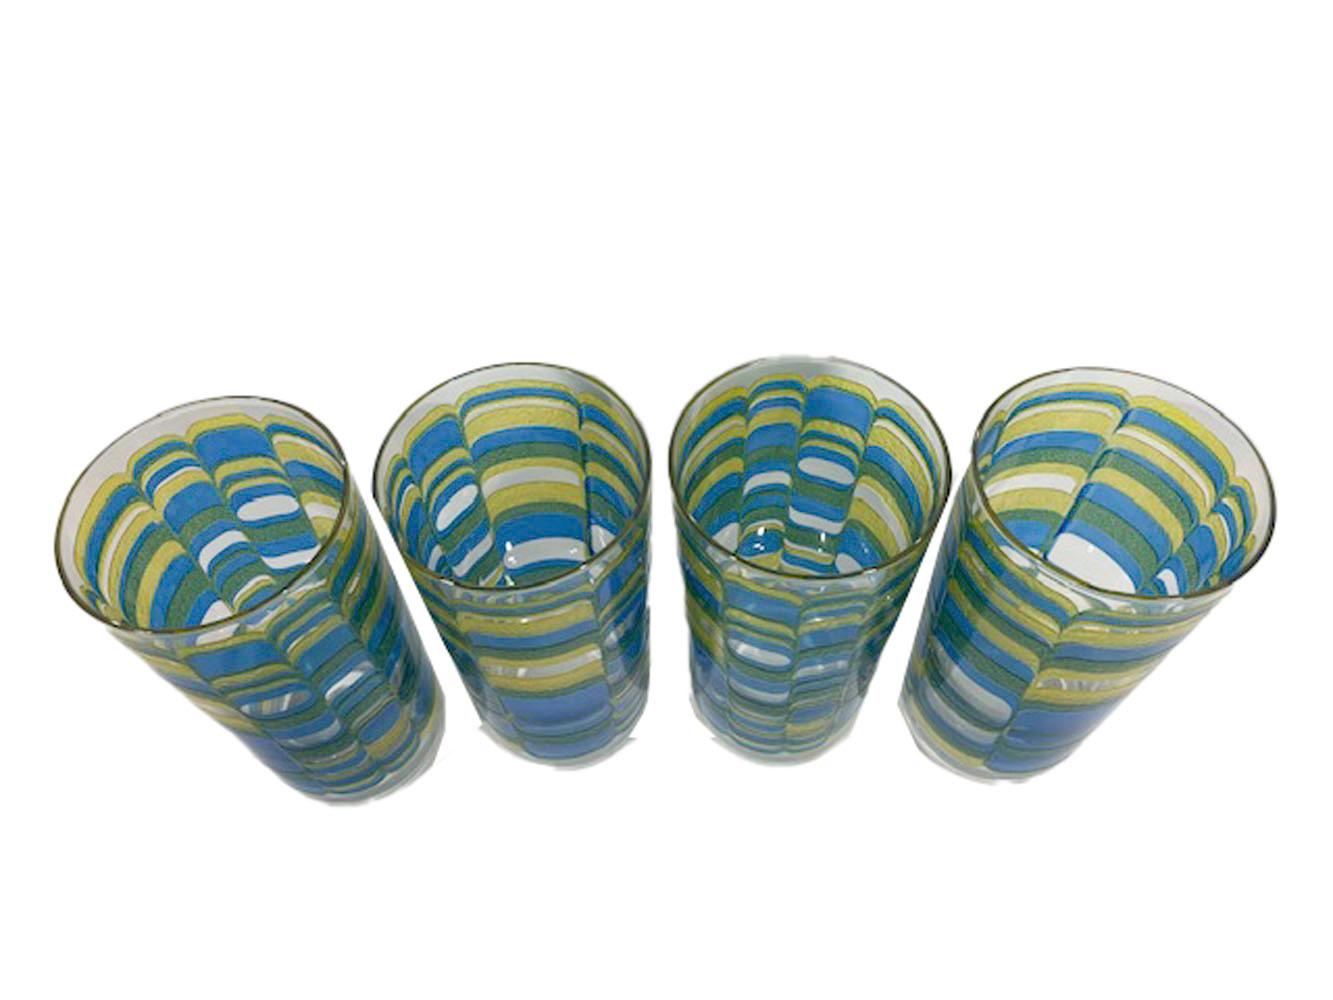 Six vintage highball glasses designed by Irene Pasinski for Washington Glass Company. Clear glass decorated in a geometric design with translucent blue and yellow enamels producing green where they overlap. Marked Pasinski - Washington with the